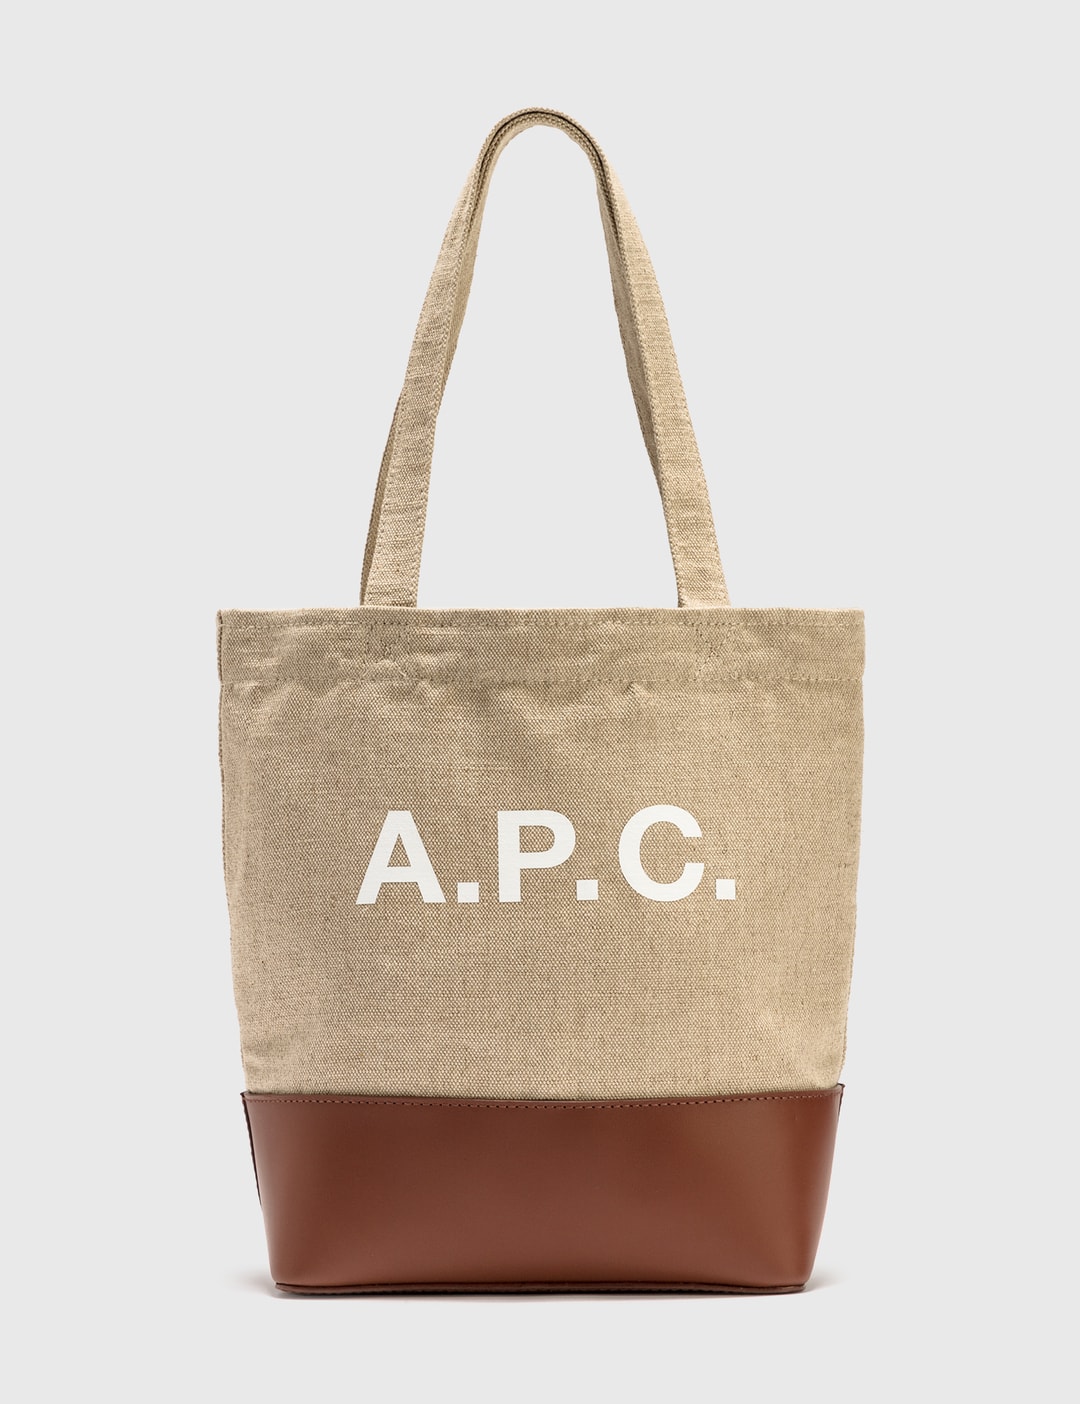 A.P.C. - Axelle Tote Bag | HBX - Globally Curated Fashion and Lifestyle ...